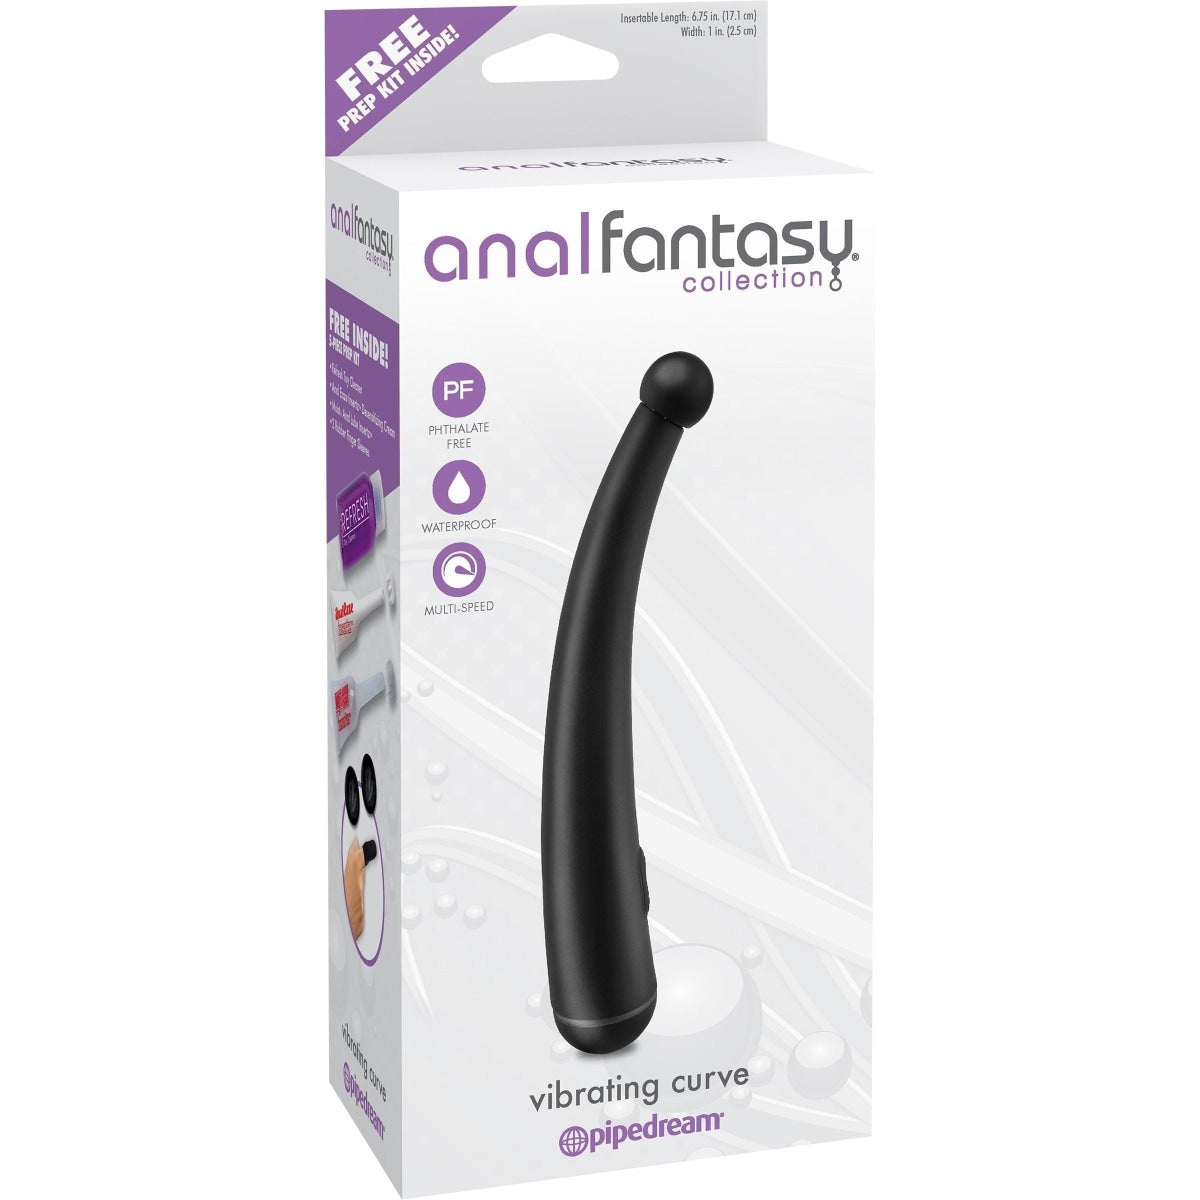 Anal Fantasy Vibrating Curve Intimates Adult Boutique